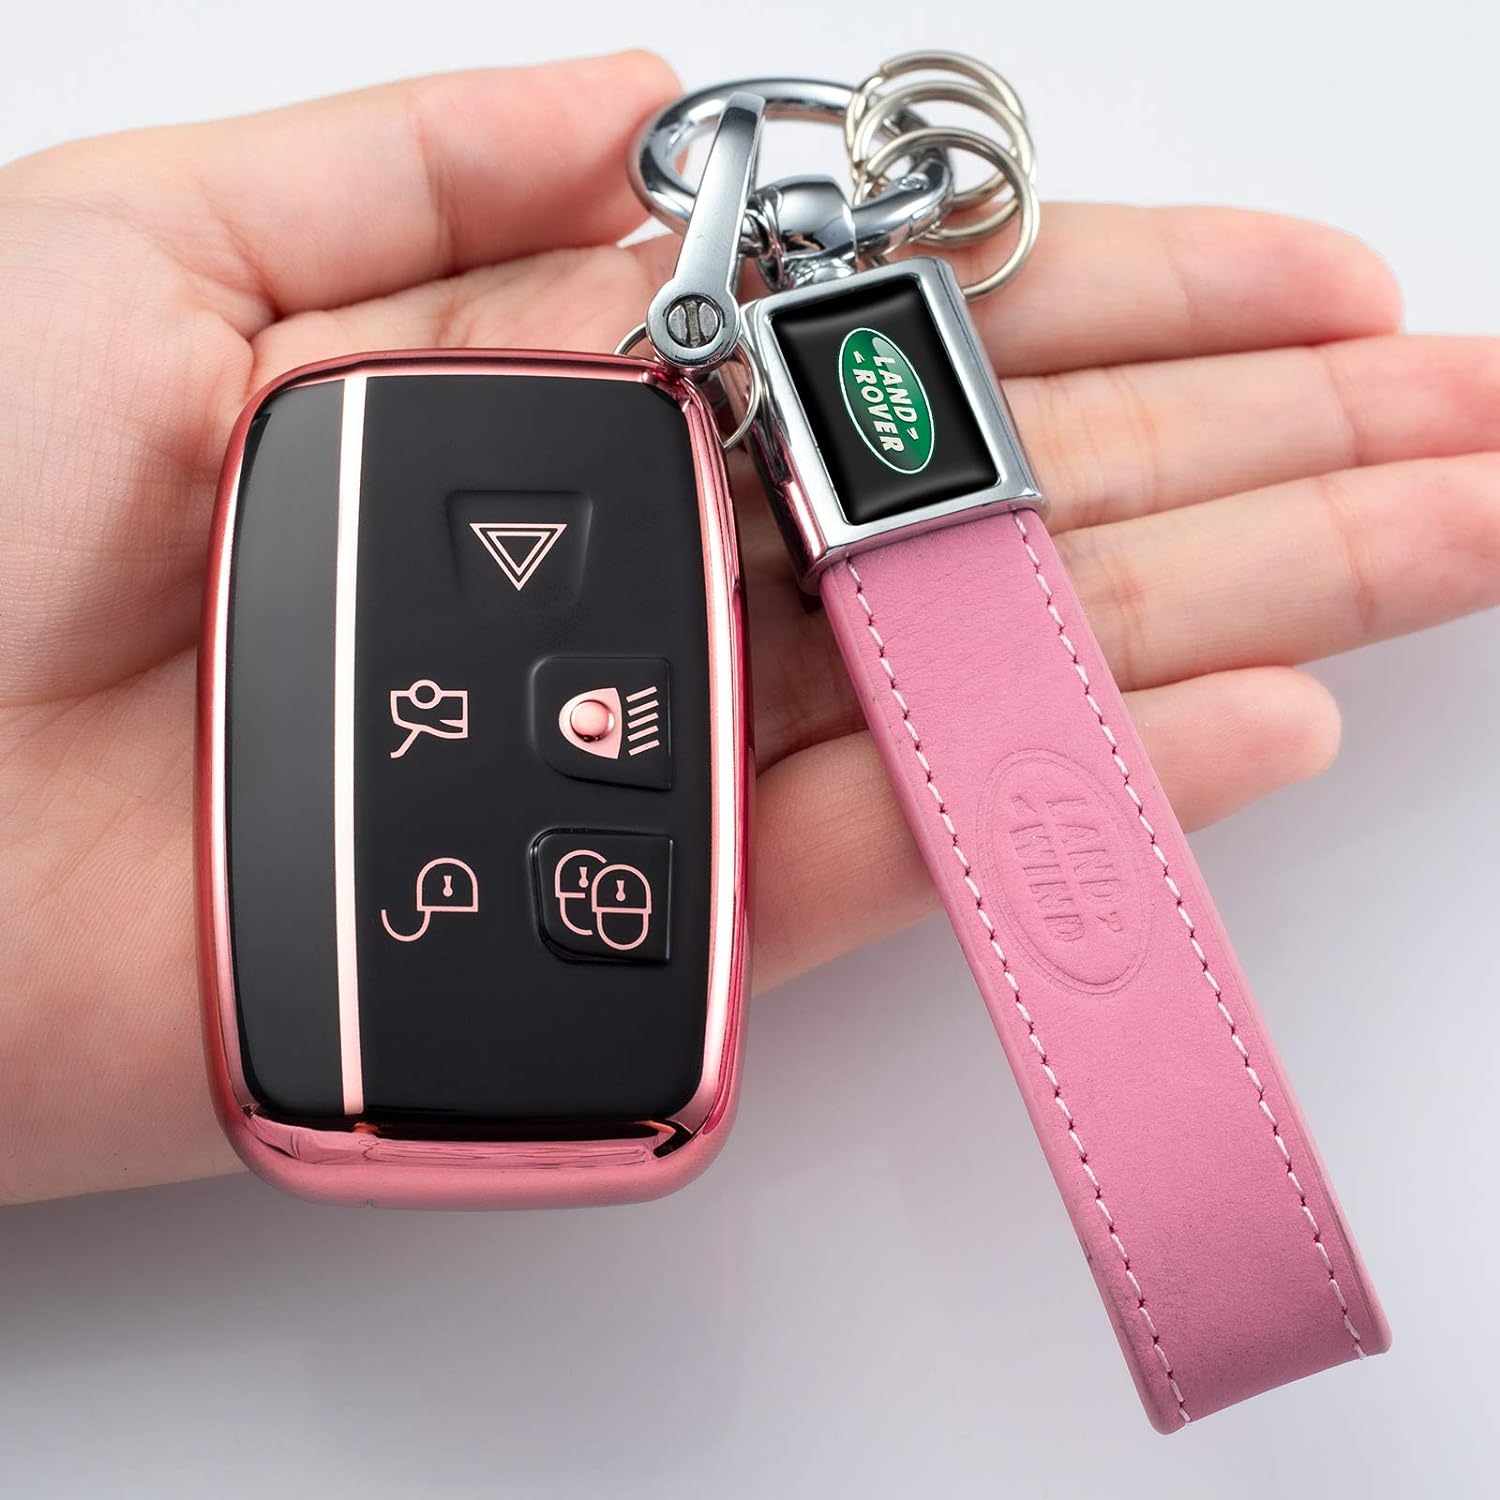 Pink TPU Car Remote Smart Key Case Covers For Land Range Rover Discovery Jaguar